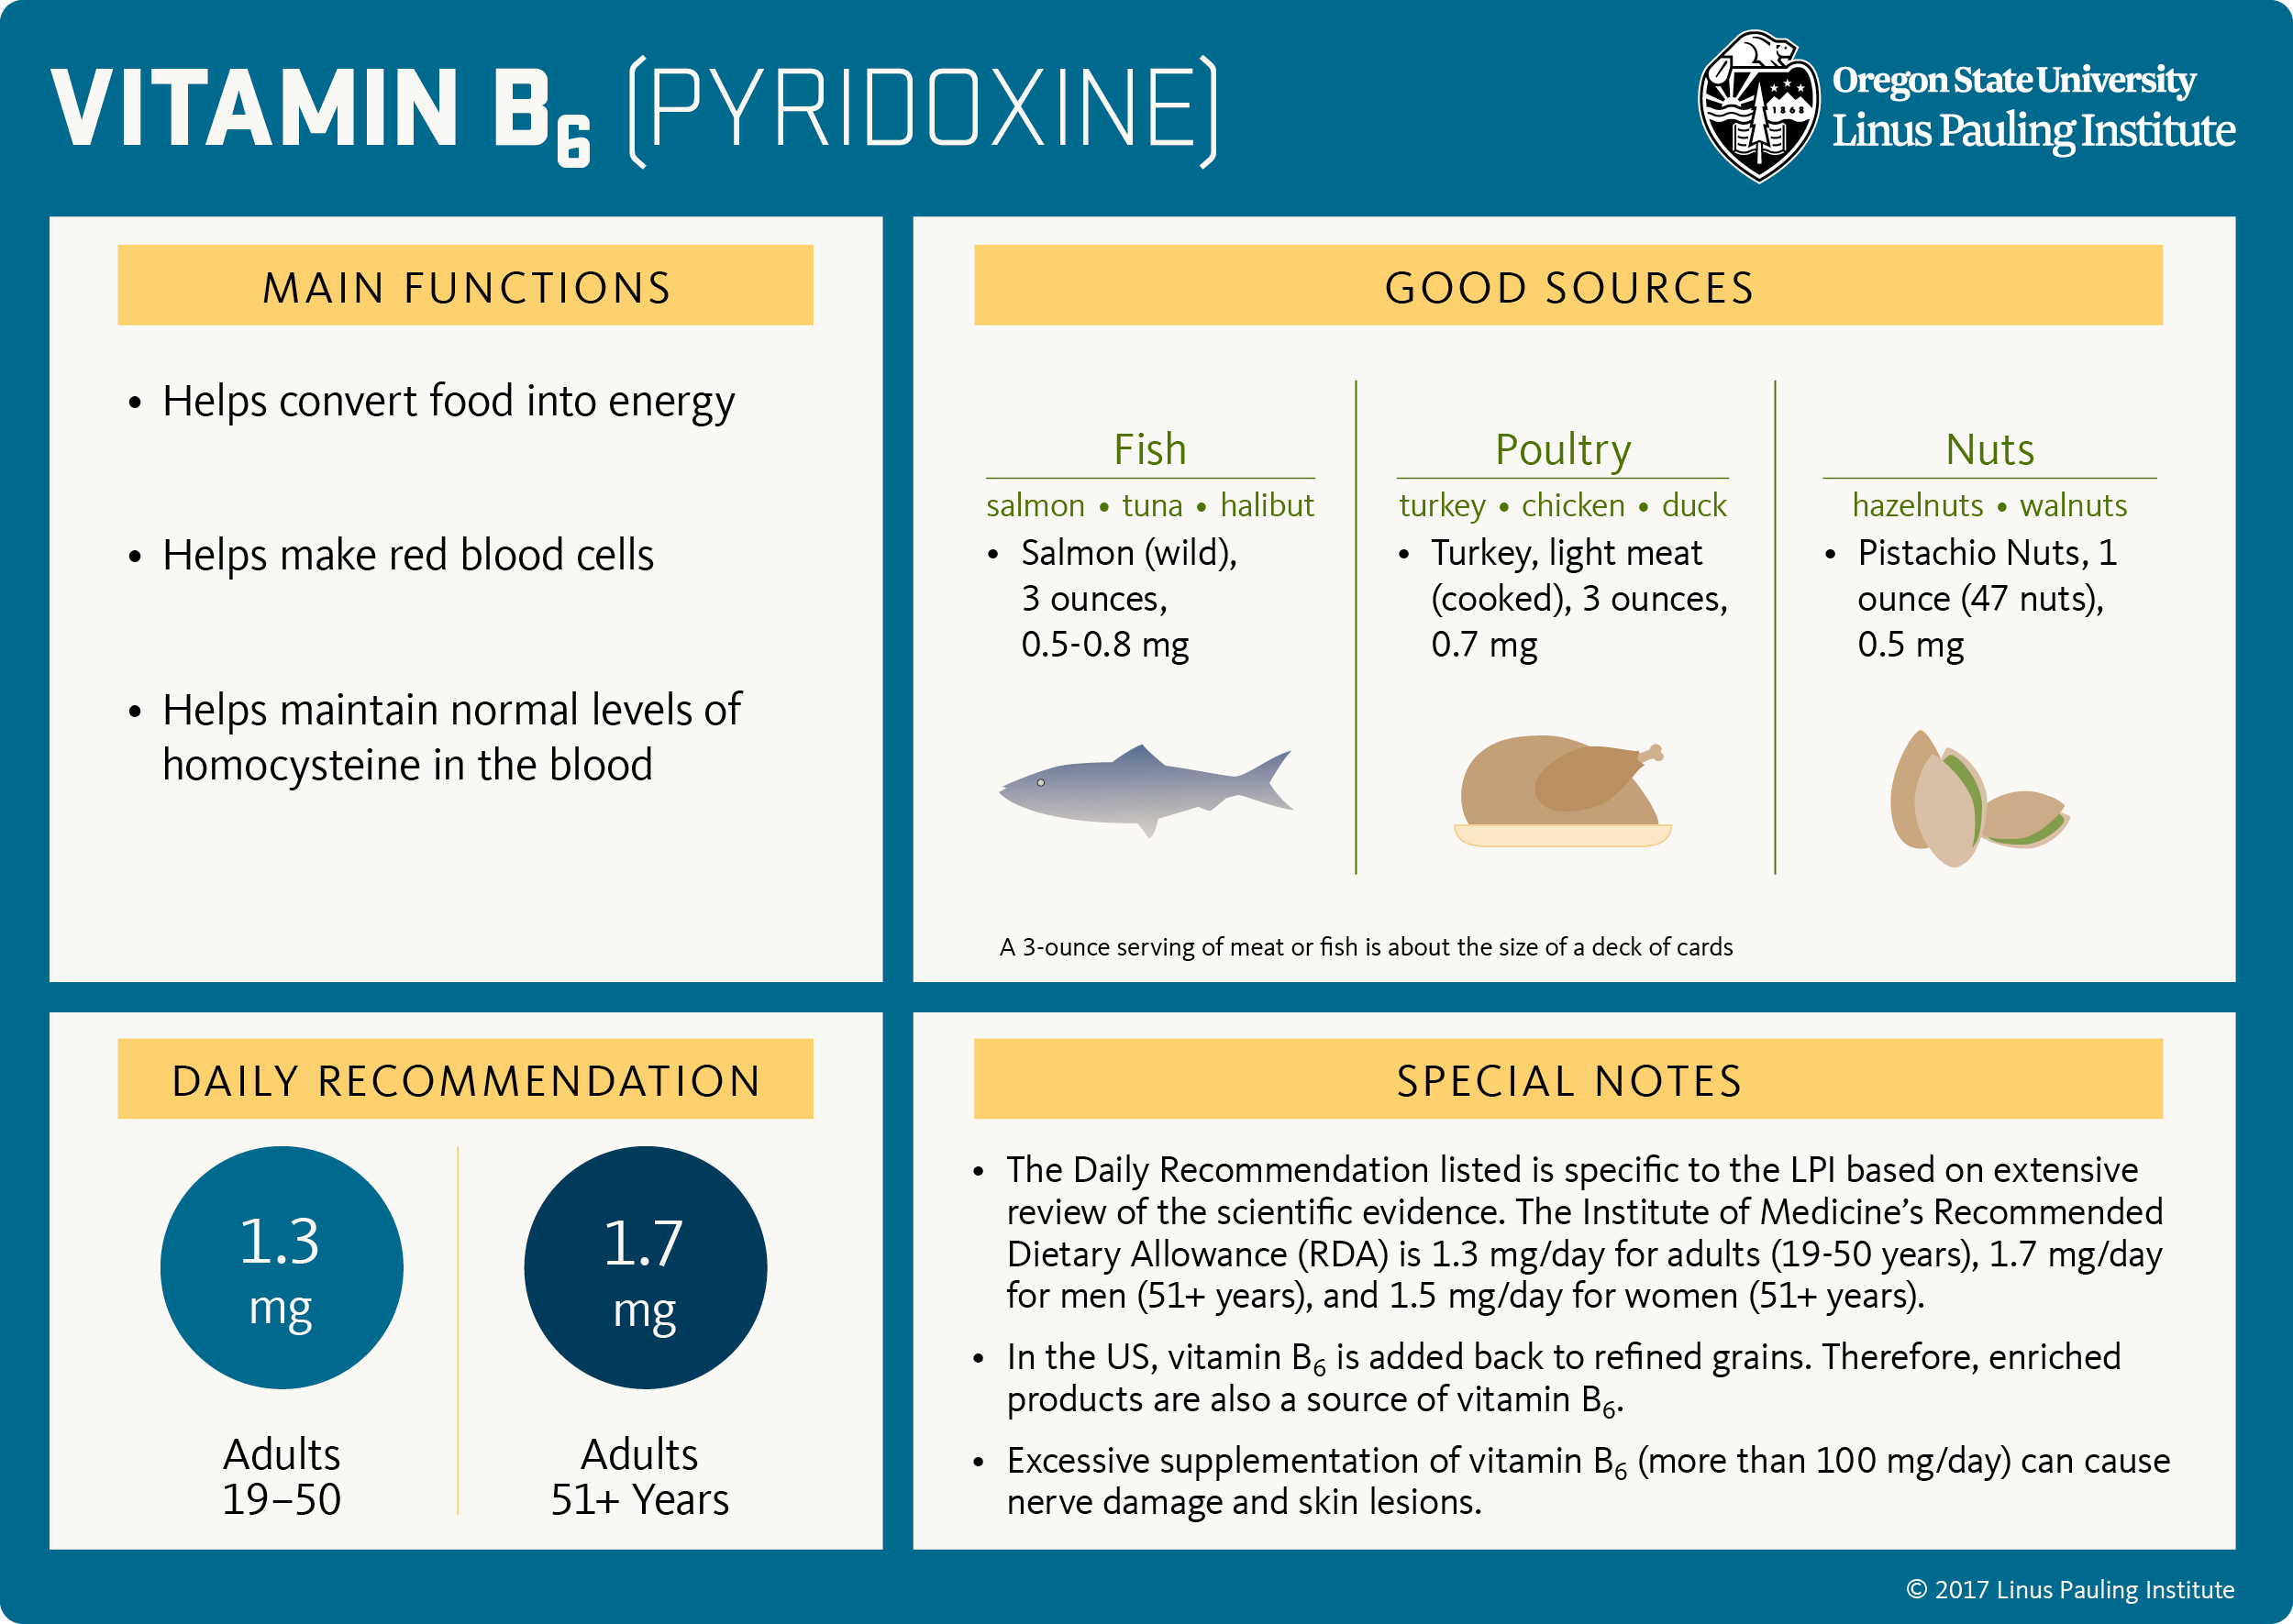 Vitamin B6 Flashcard. Main Functions: 1) helps convert food into energy, 2) helps make red blood cells, 3) helps maintain normal levels of homocysteine in the blood. Good Sources: Fish (slamon, tuna, halibut), wild salmon, 3 ounces, 0.5-0.8 mg; poultry (turkey, chicken, duck), light-meat turkey (cooked), 3 ounces = 0.7 mg; nuts (hazelnuts, walnuts) pistachio nuts, 1 ounce or 47 pistachios = 0.5 mg. Daily Recommendation: 2 mg for all adults. Special Notes: 1) The Daily Recommendation listed is specific to the LPI based on extensive review of the scientific evidence. The Institute of Medicine's Recommended Dietary Allowance (RDA) is 1.3 mg/day for adults 19-50 years, 1.7 mg/day for men 51 years and older, and 1.5 mg/day for women 51 years and older. 2) In the US, vitamin B6 is added back to refined grains. Therefore, enriched products are also a source of vitamin B6. 3) Excessive supplementation of vitamin B6 (more than 100 mg/day) can cause nerve damage and skin lesions.